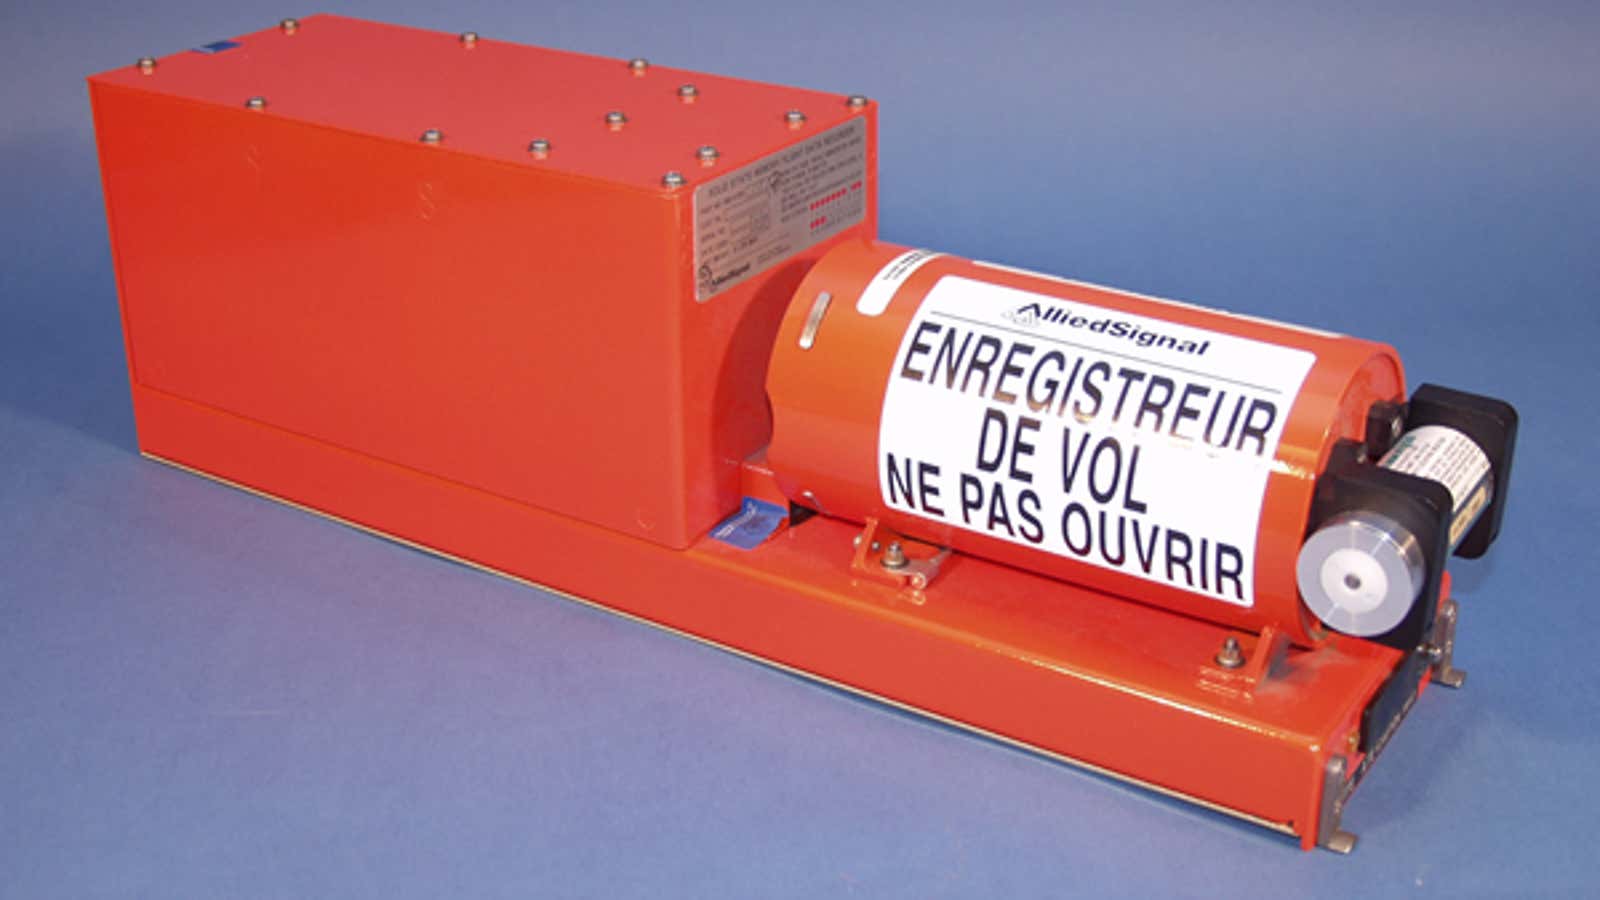 (Translation of warning message in French: â€œFlight recorder do not openâ€�.) The warning appears in English on the other side.